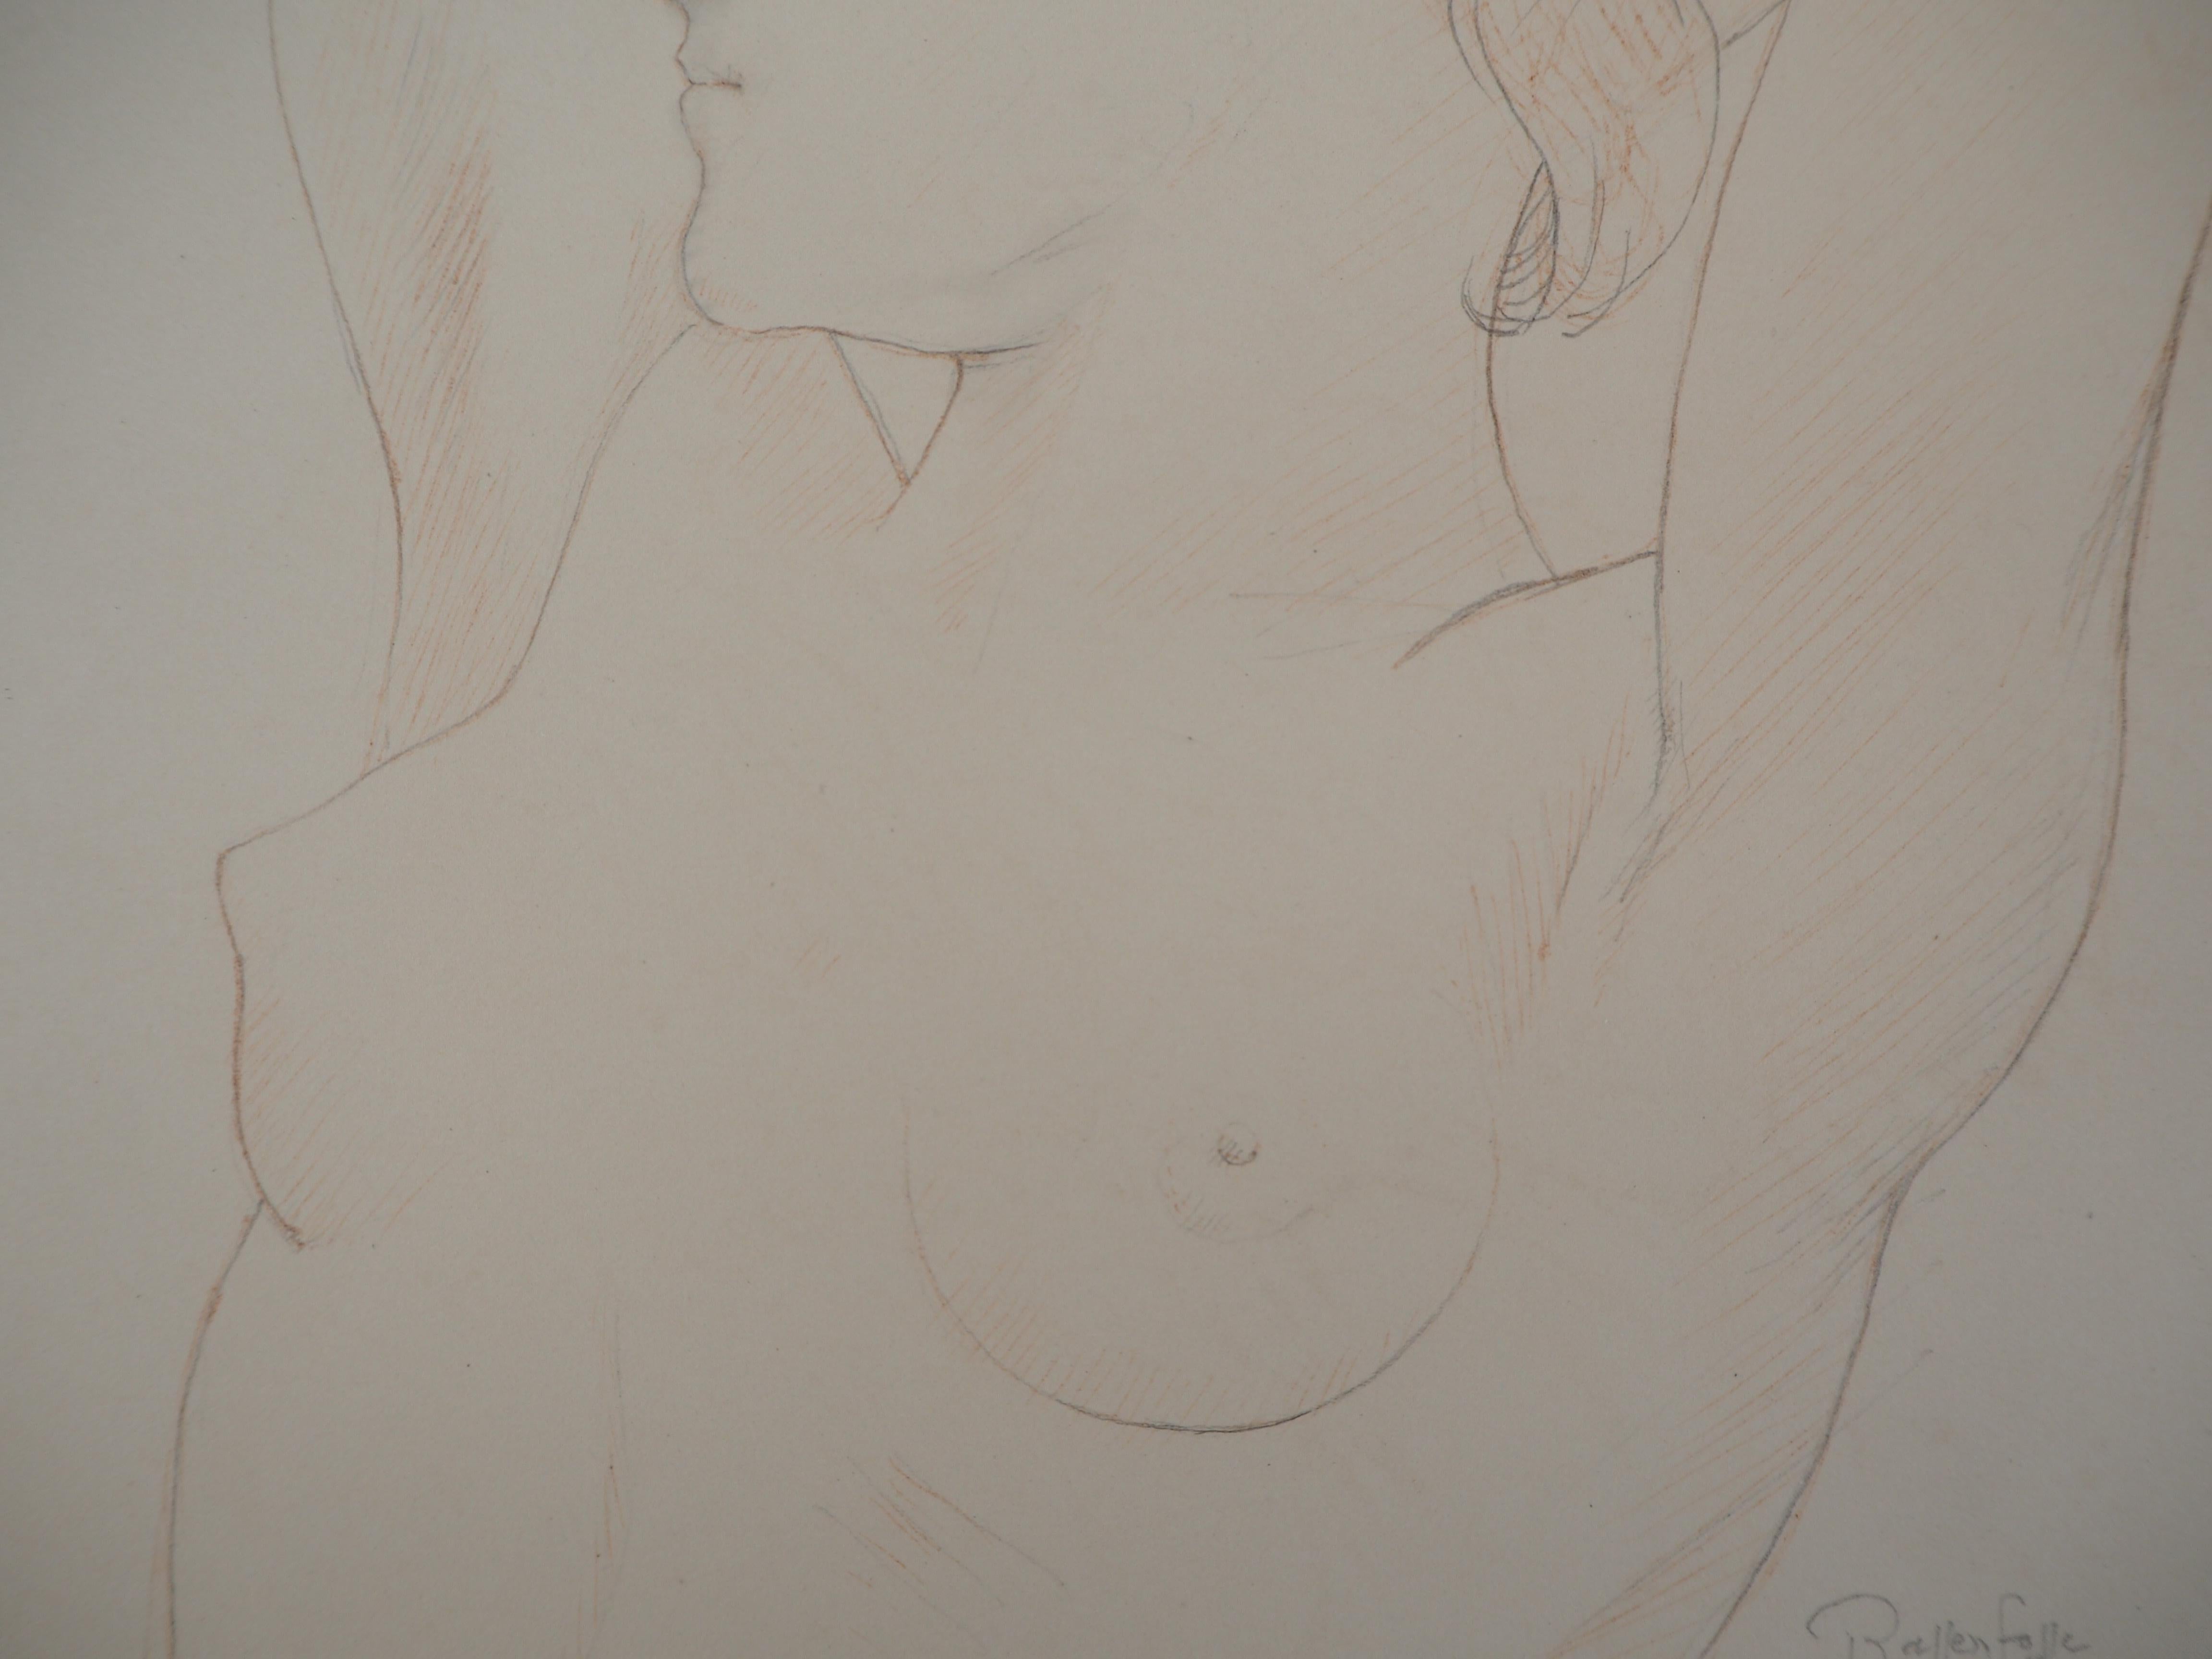 Stretching Nude - Original drawing, Handsigned 2